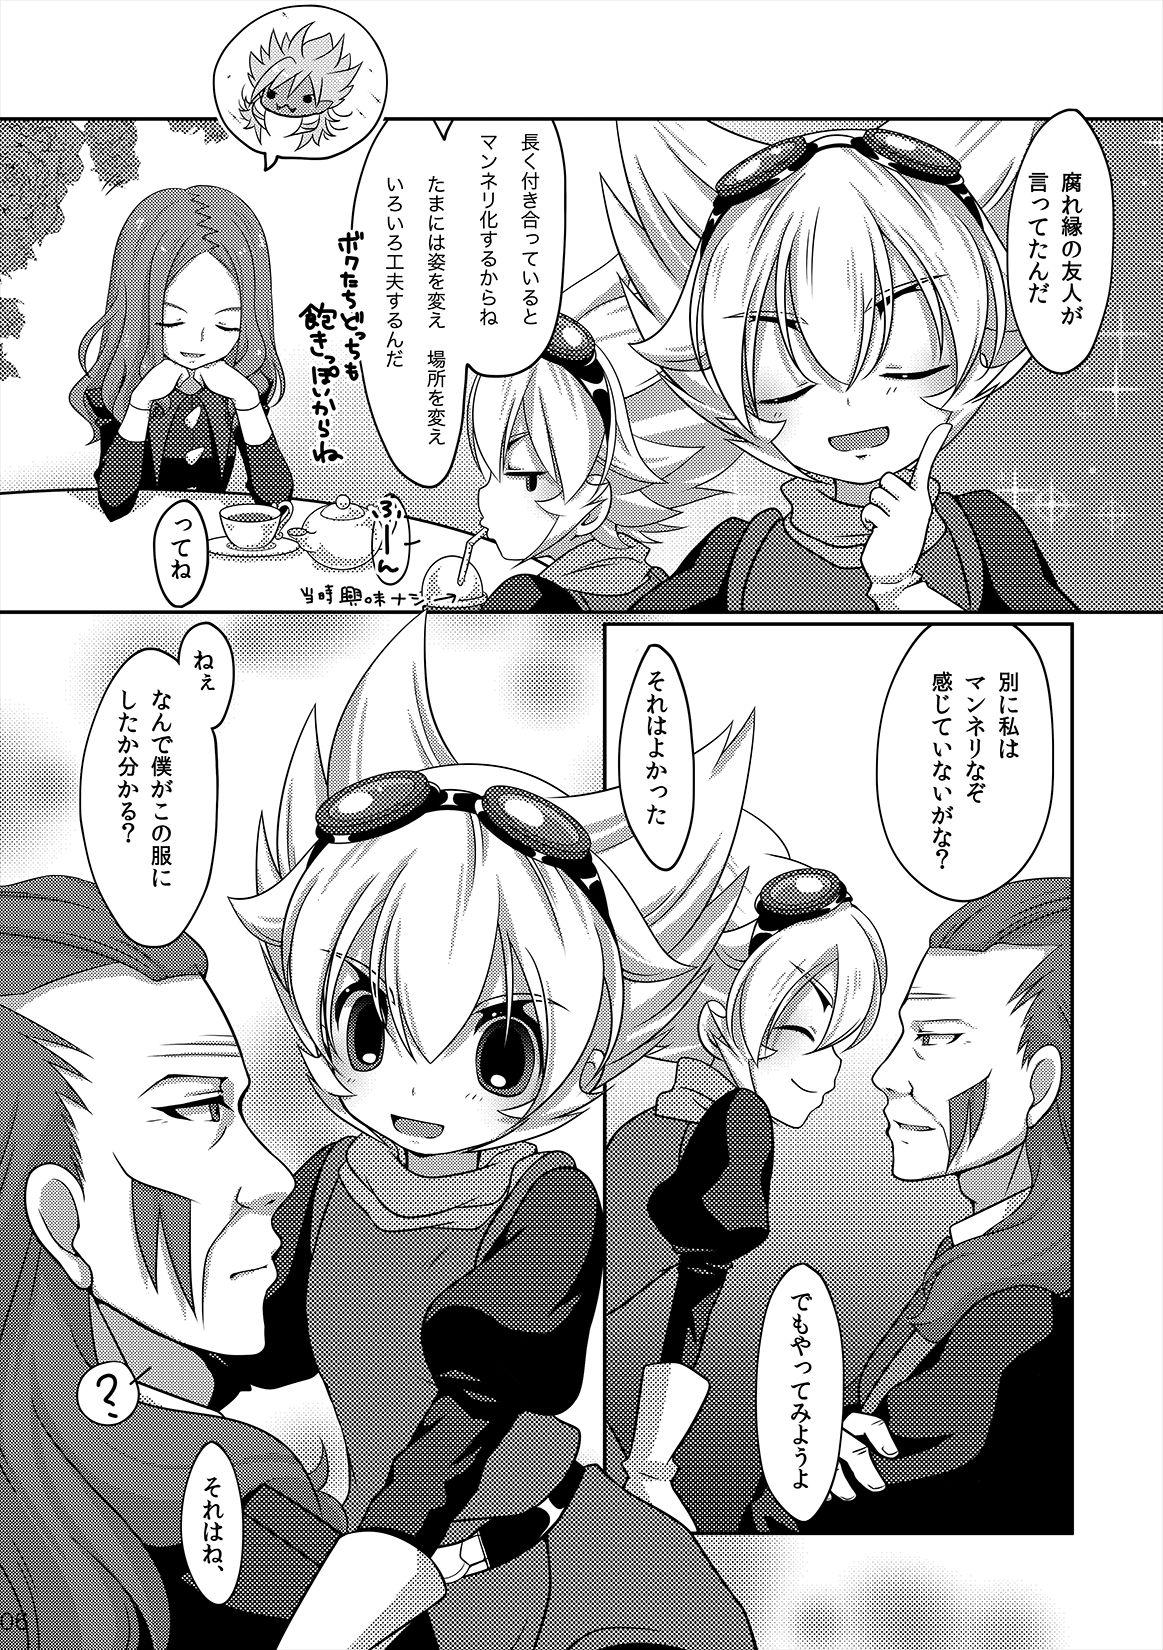 Dicks Style Change! - Inazuma eleven go This - Page 4